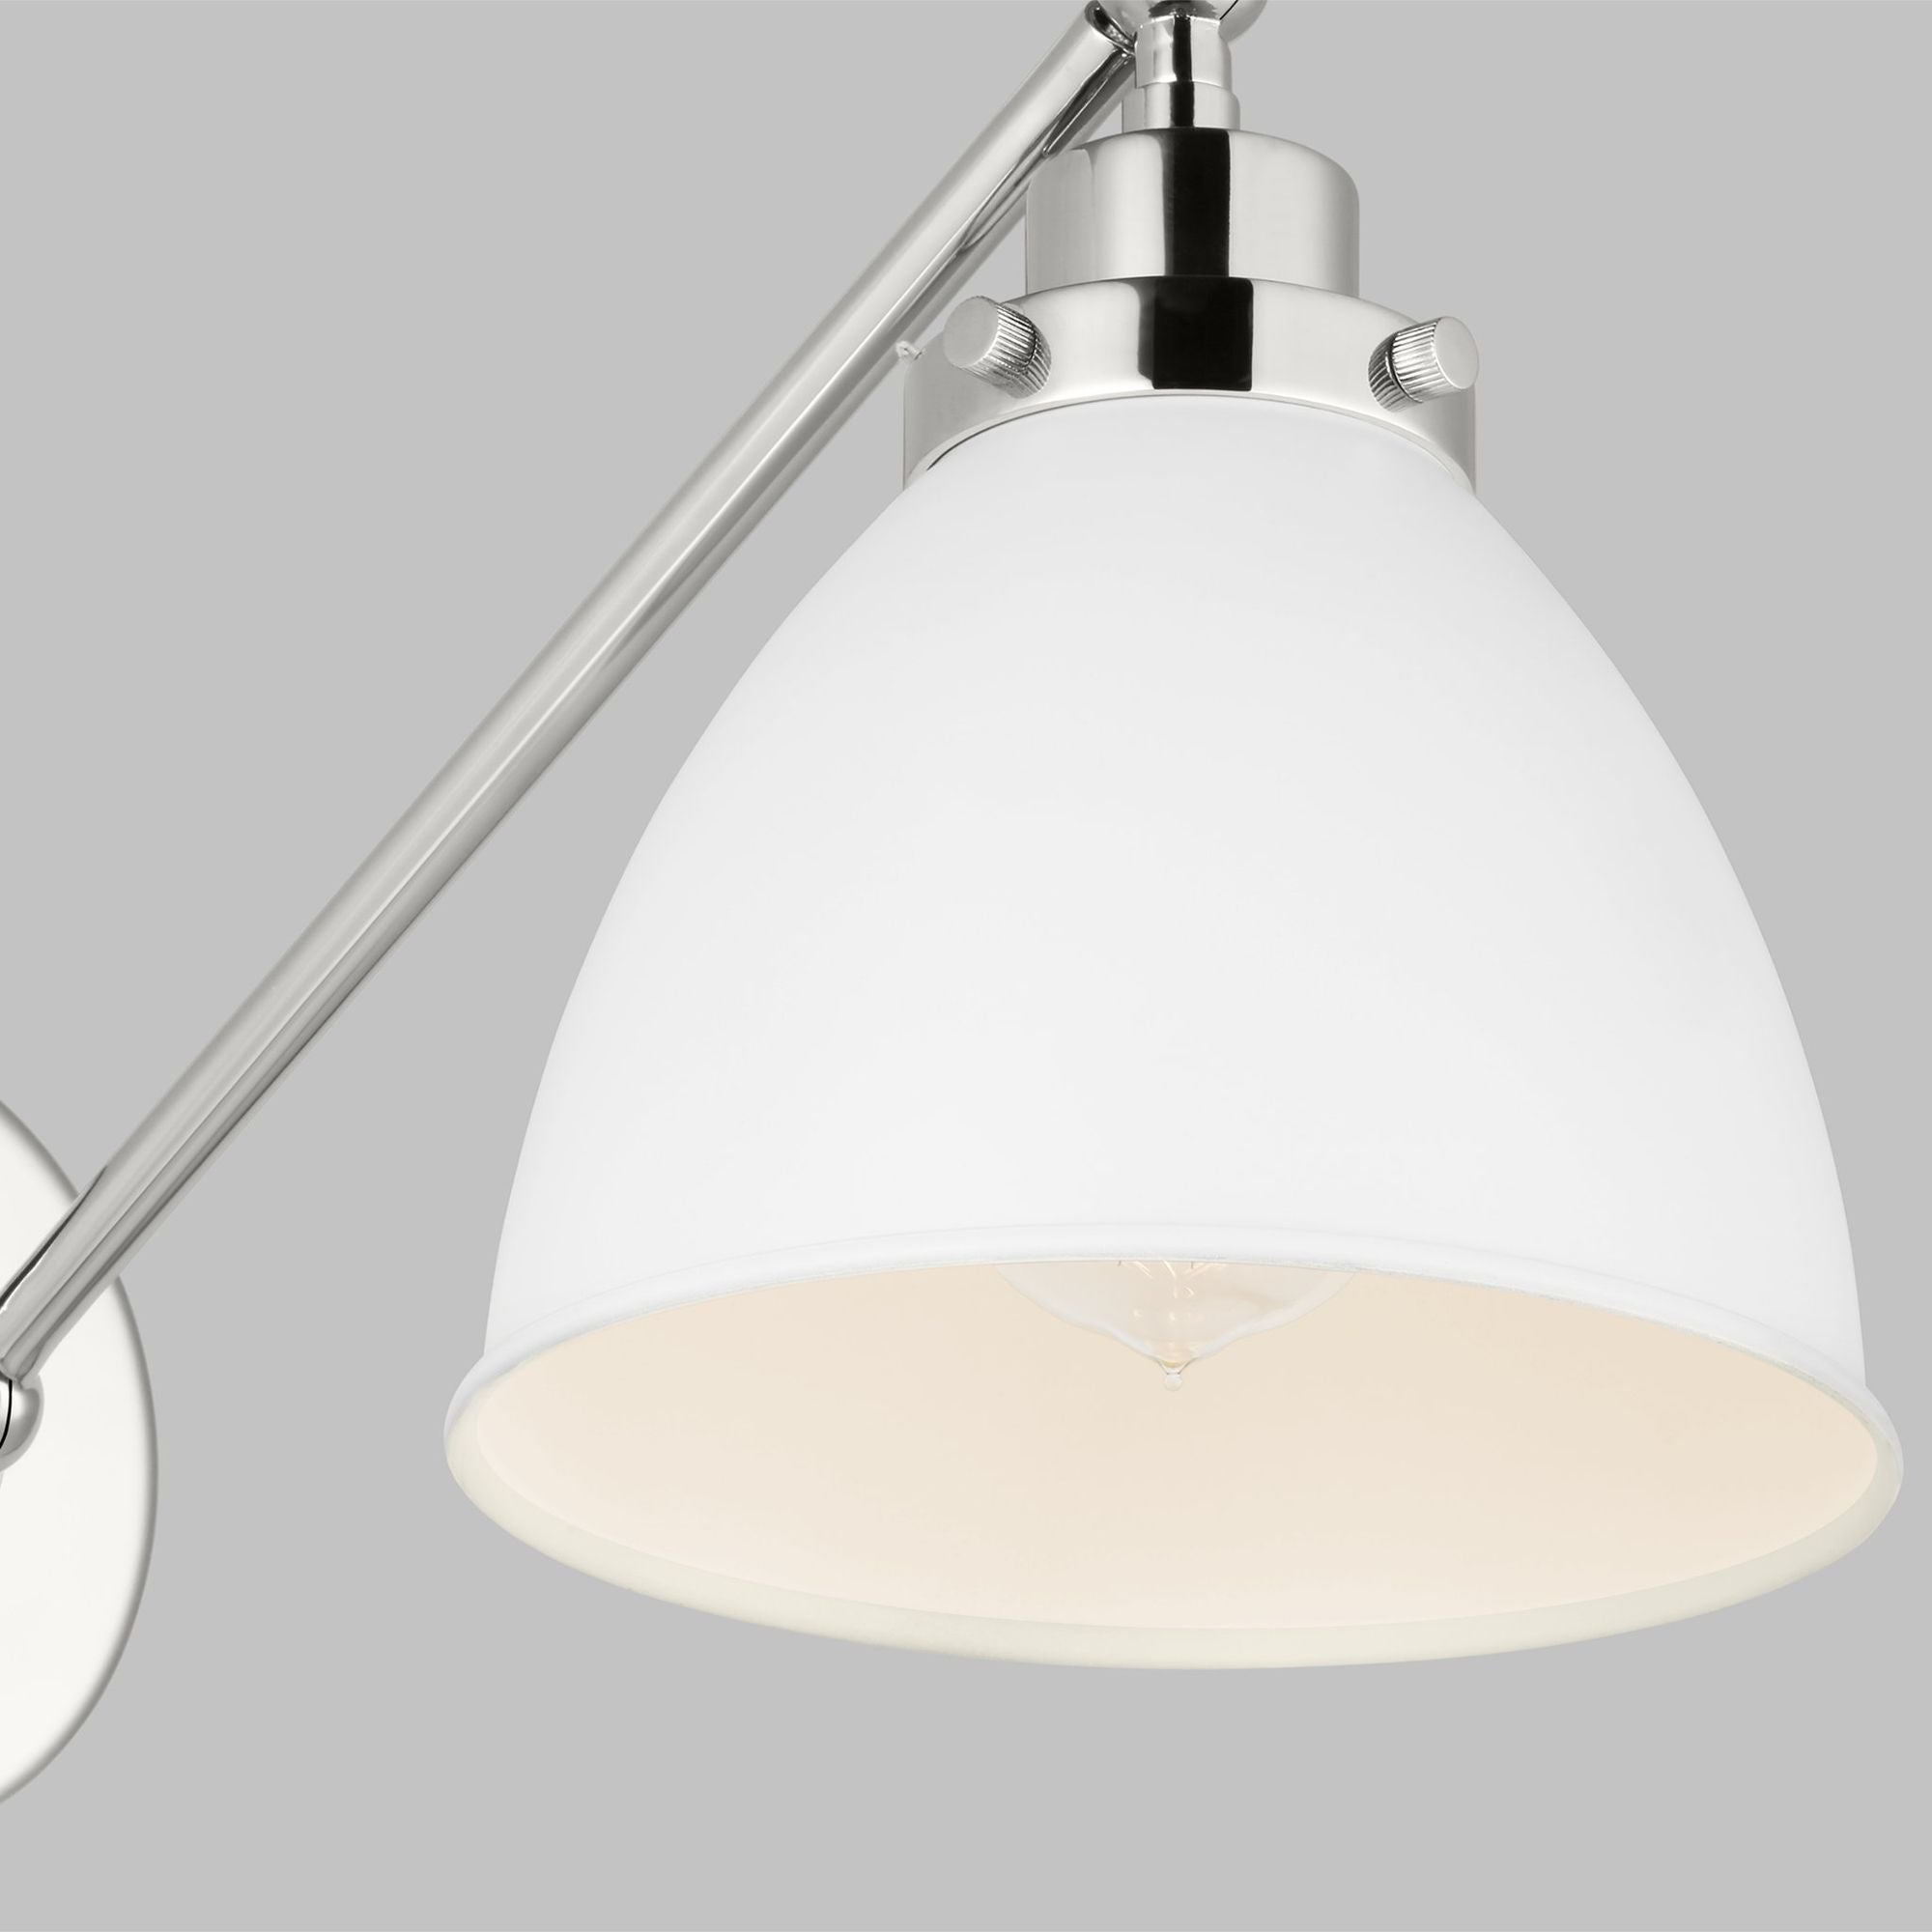 Chapman & Myers Wellfleet Single Arm Dome Task Sconce in Matte White and Polished Nickel